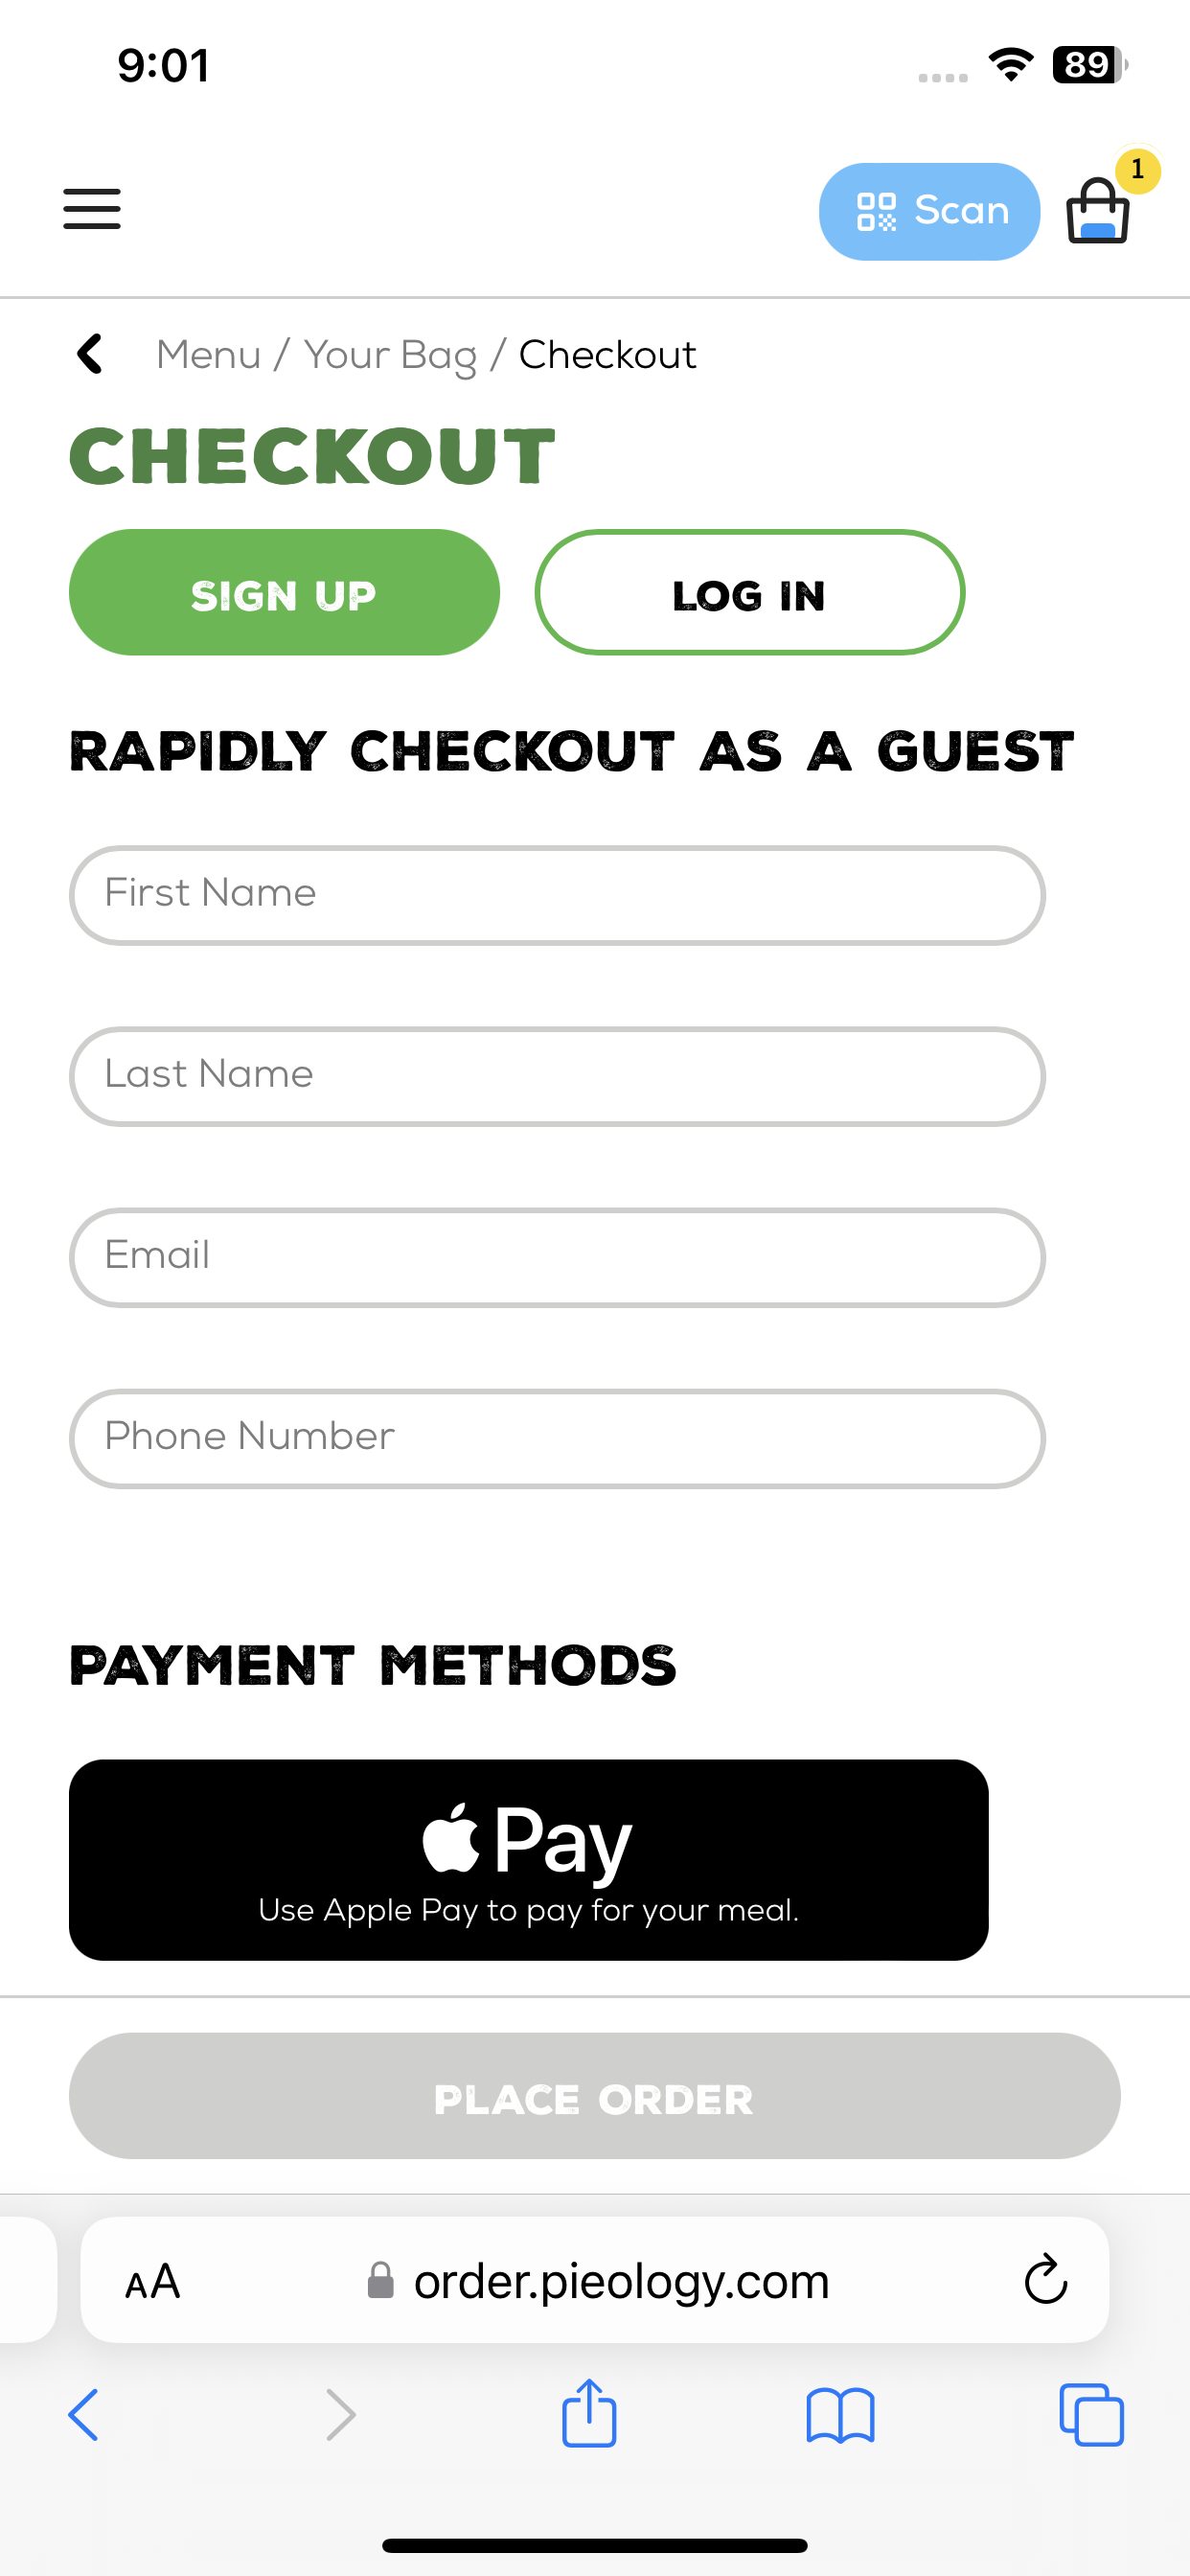 Pieology accepts Apple Pay on its website.